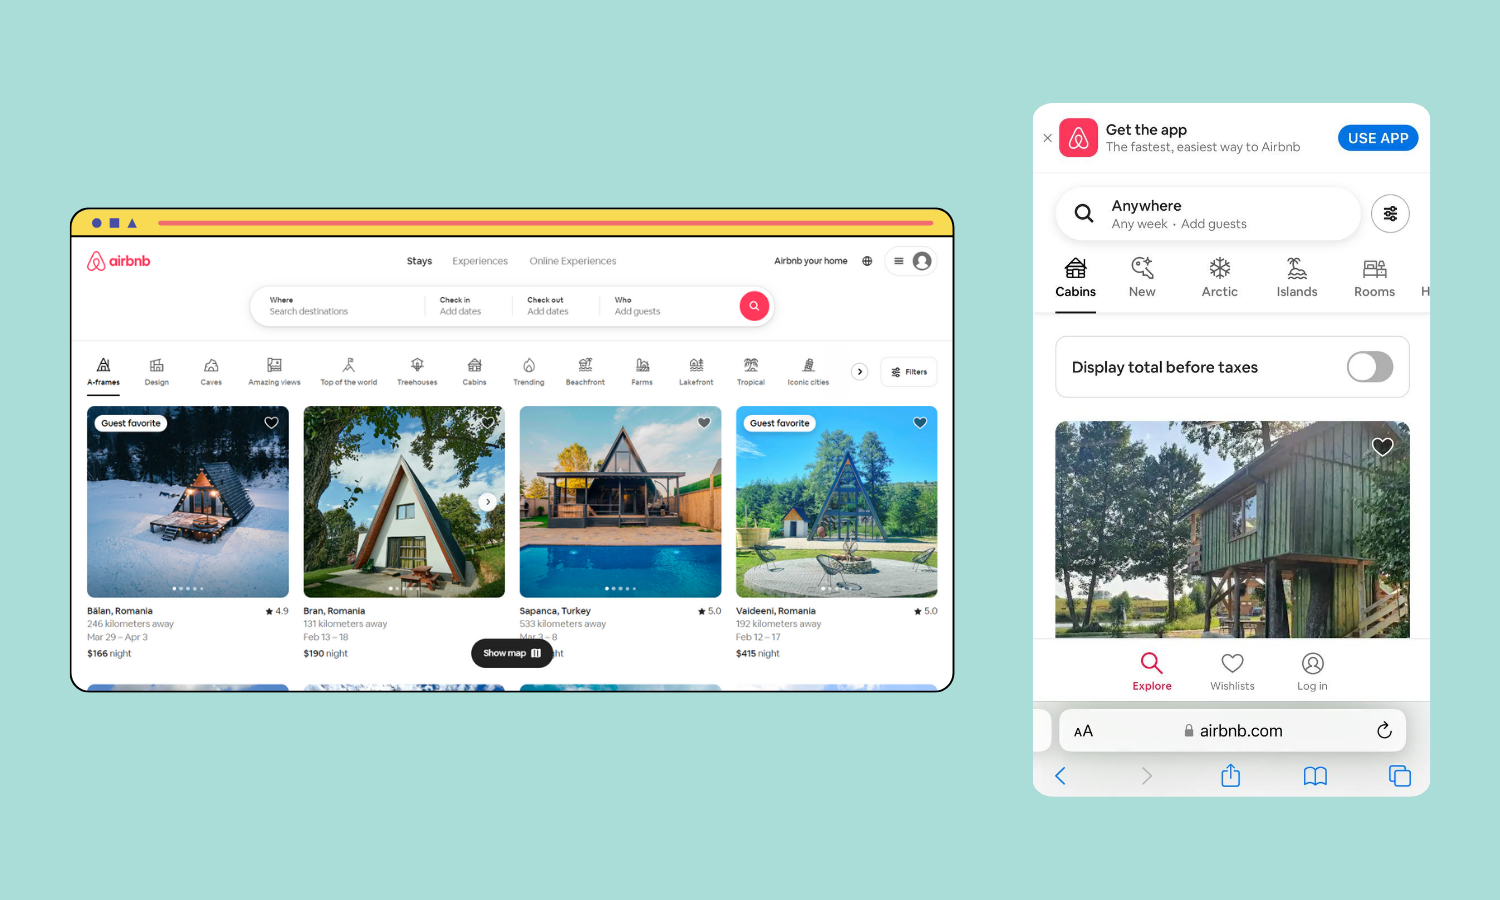 The image shows an Airbnb website viewed from a laptop and smartphone. 